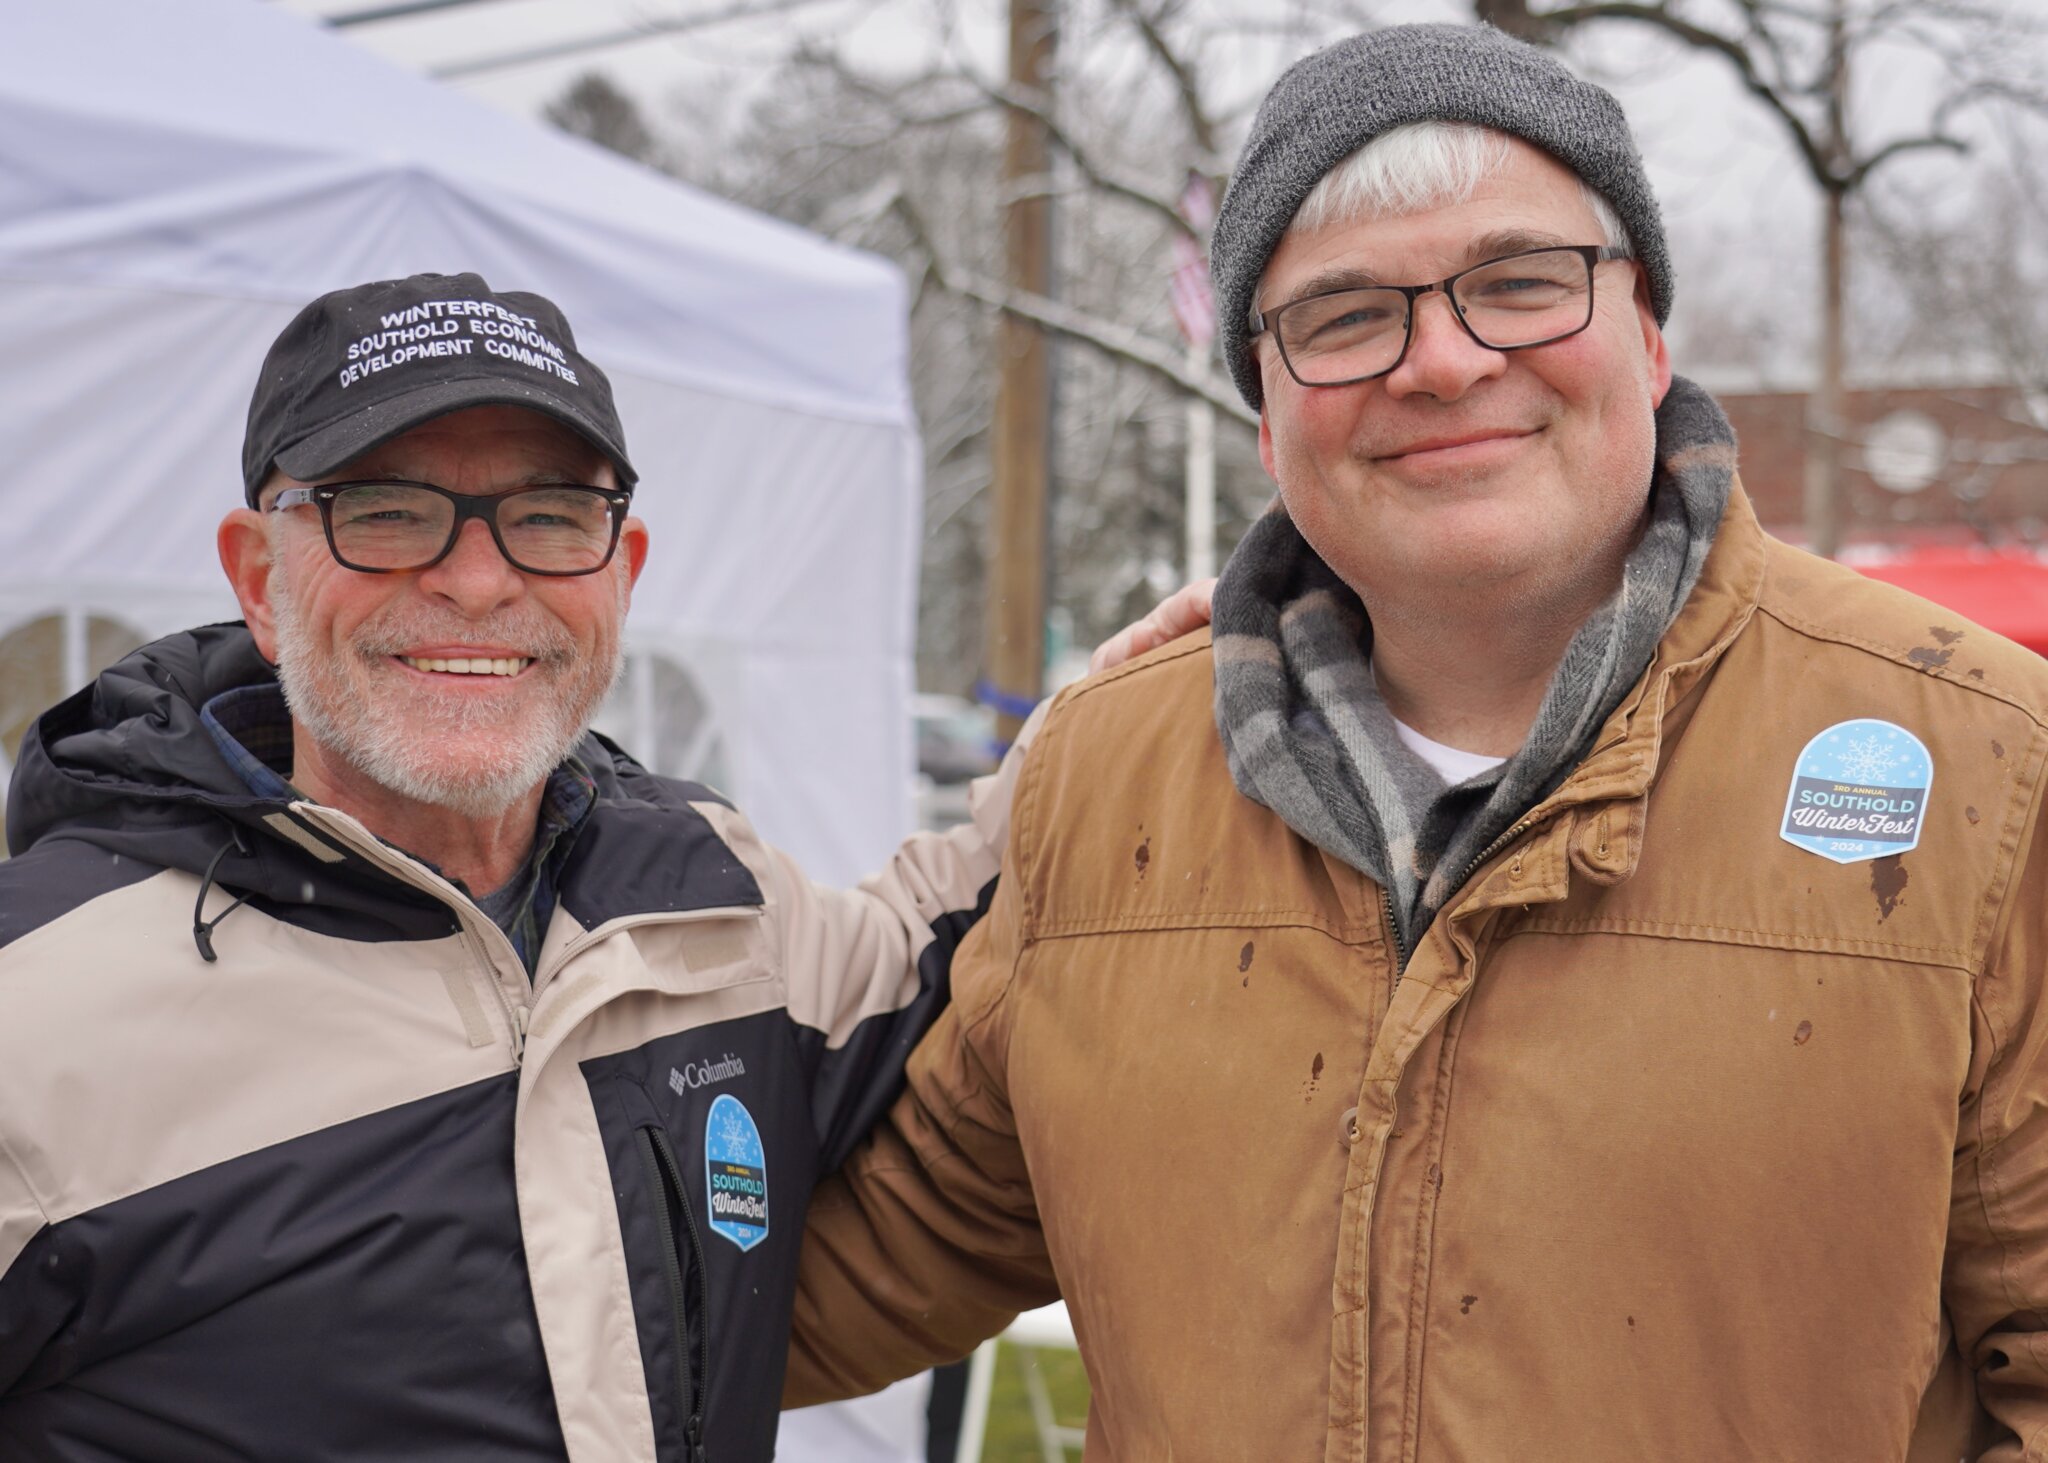 Southold Winterfest Event Organizer Brian Q. Smith, Volunteer Jerry Poole at Southold WinterFest